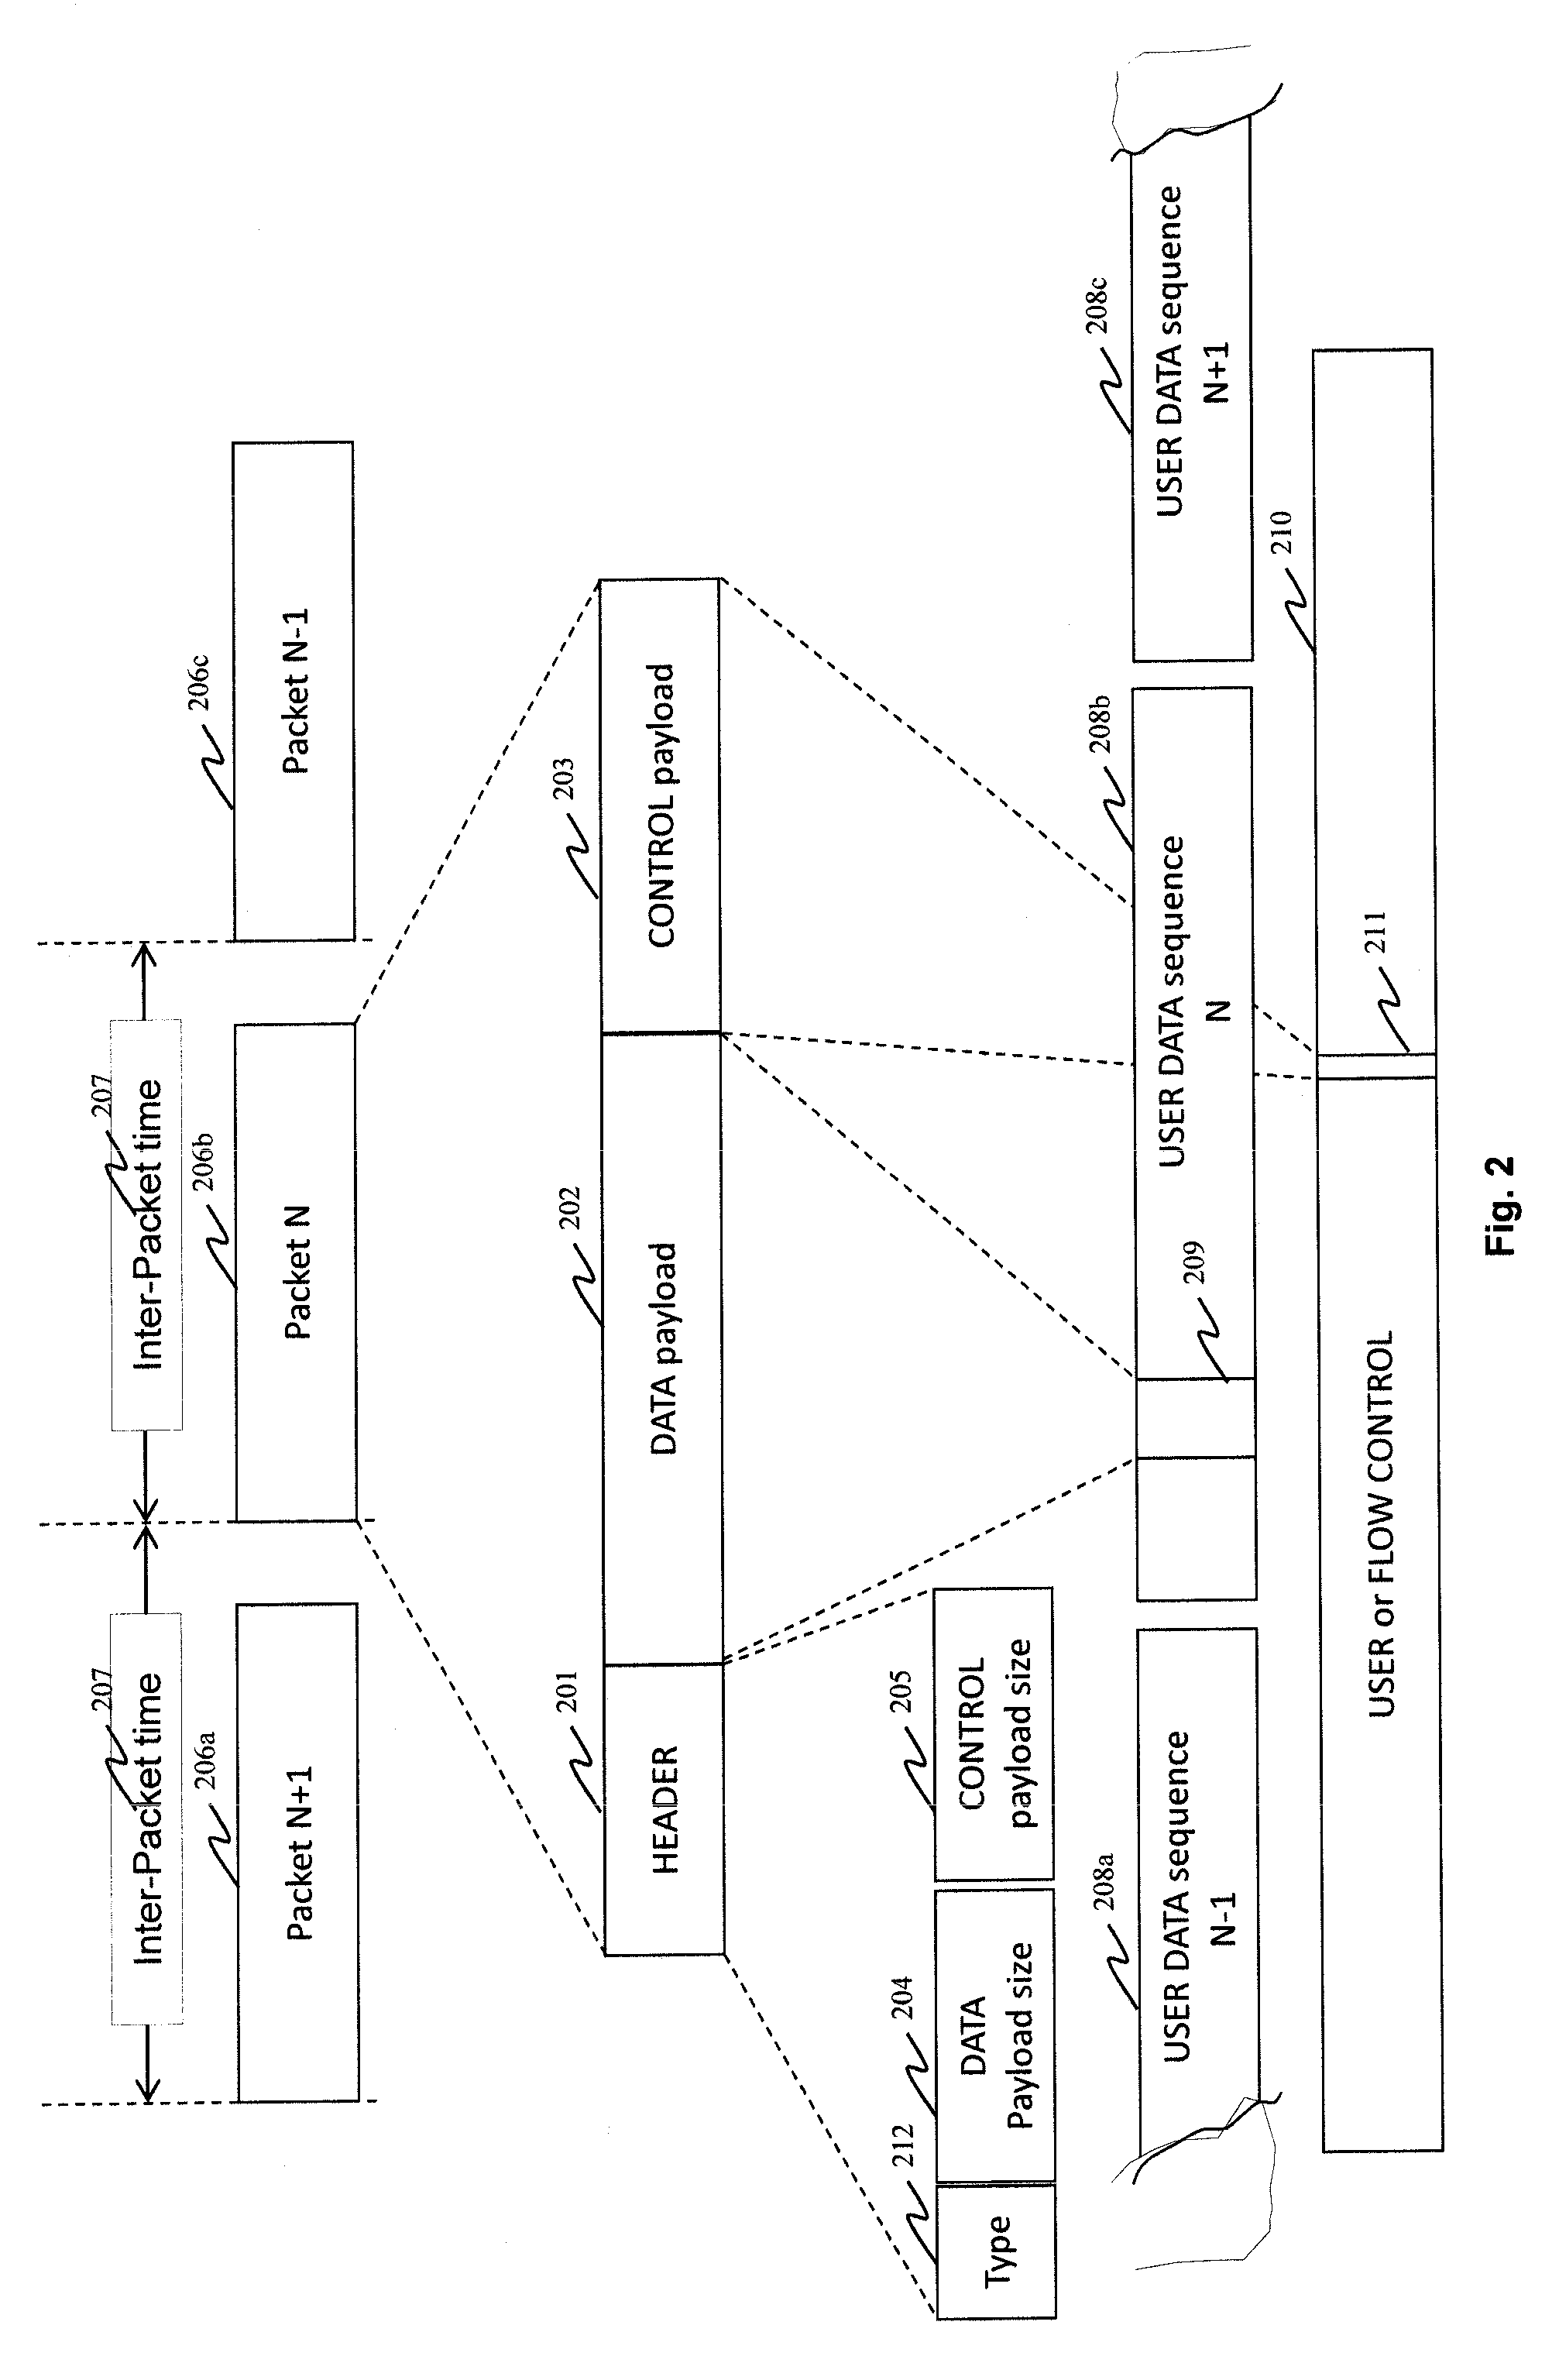 Method and apparatus for controlling the data rate of a data transmission between an emitter and a receiver